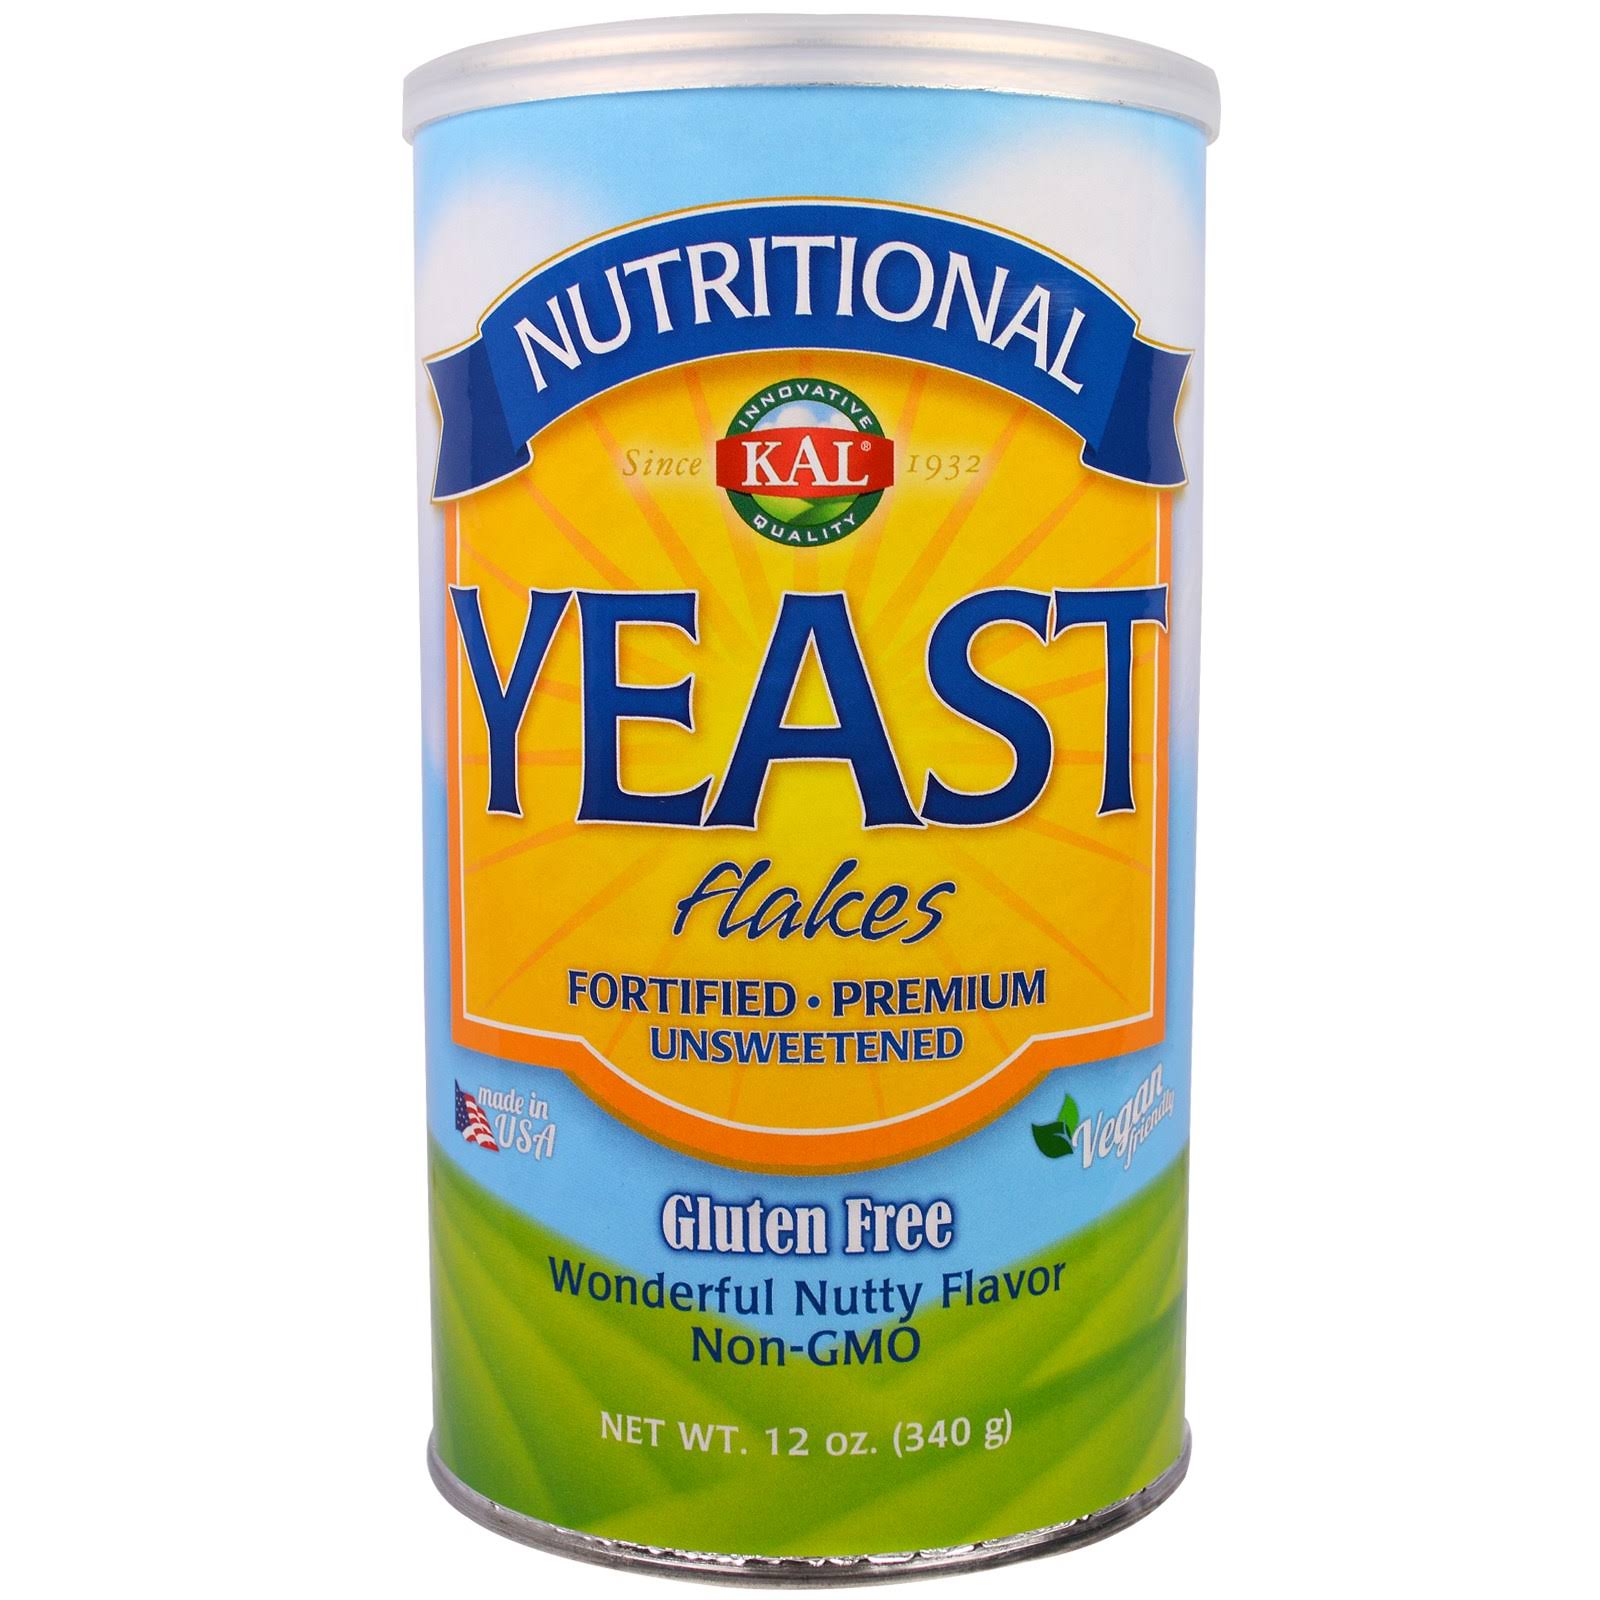 Kal Nutritional Yeast Flakes